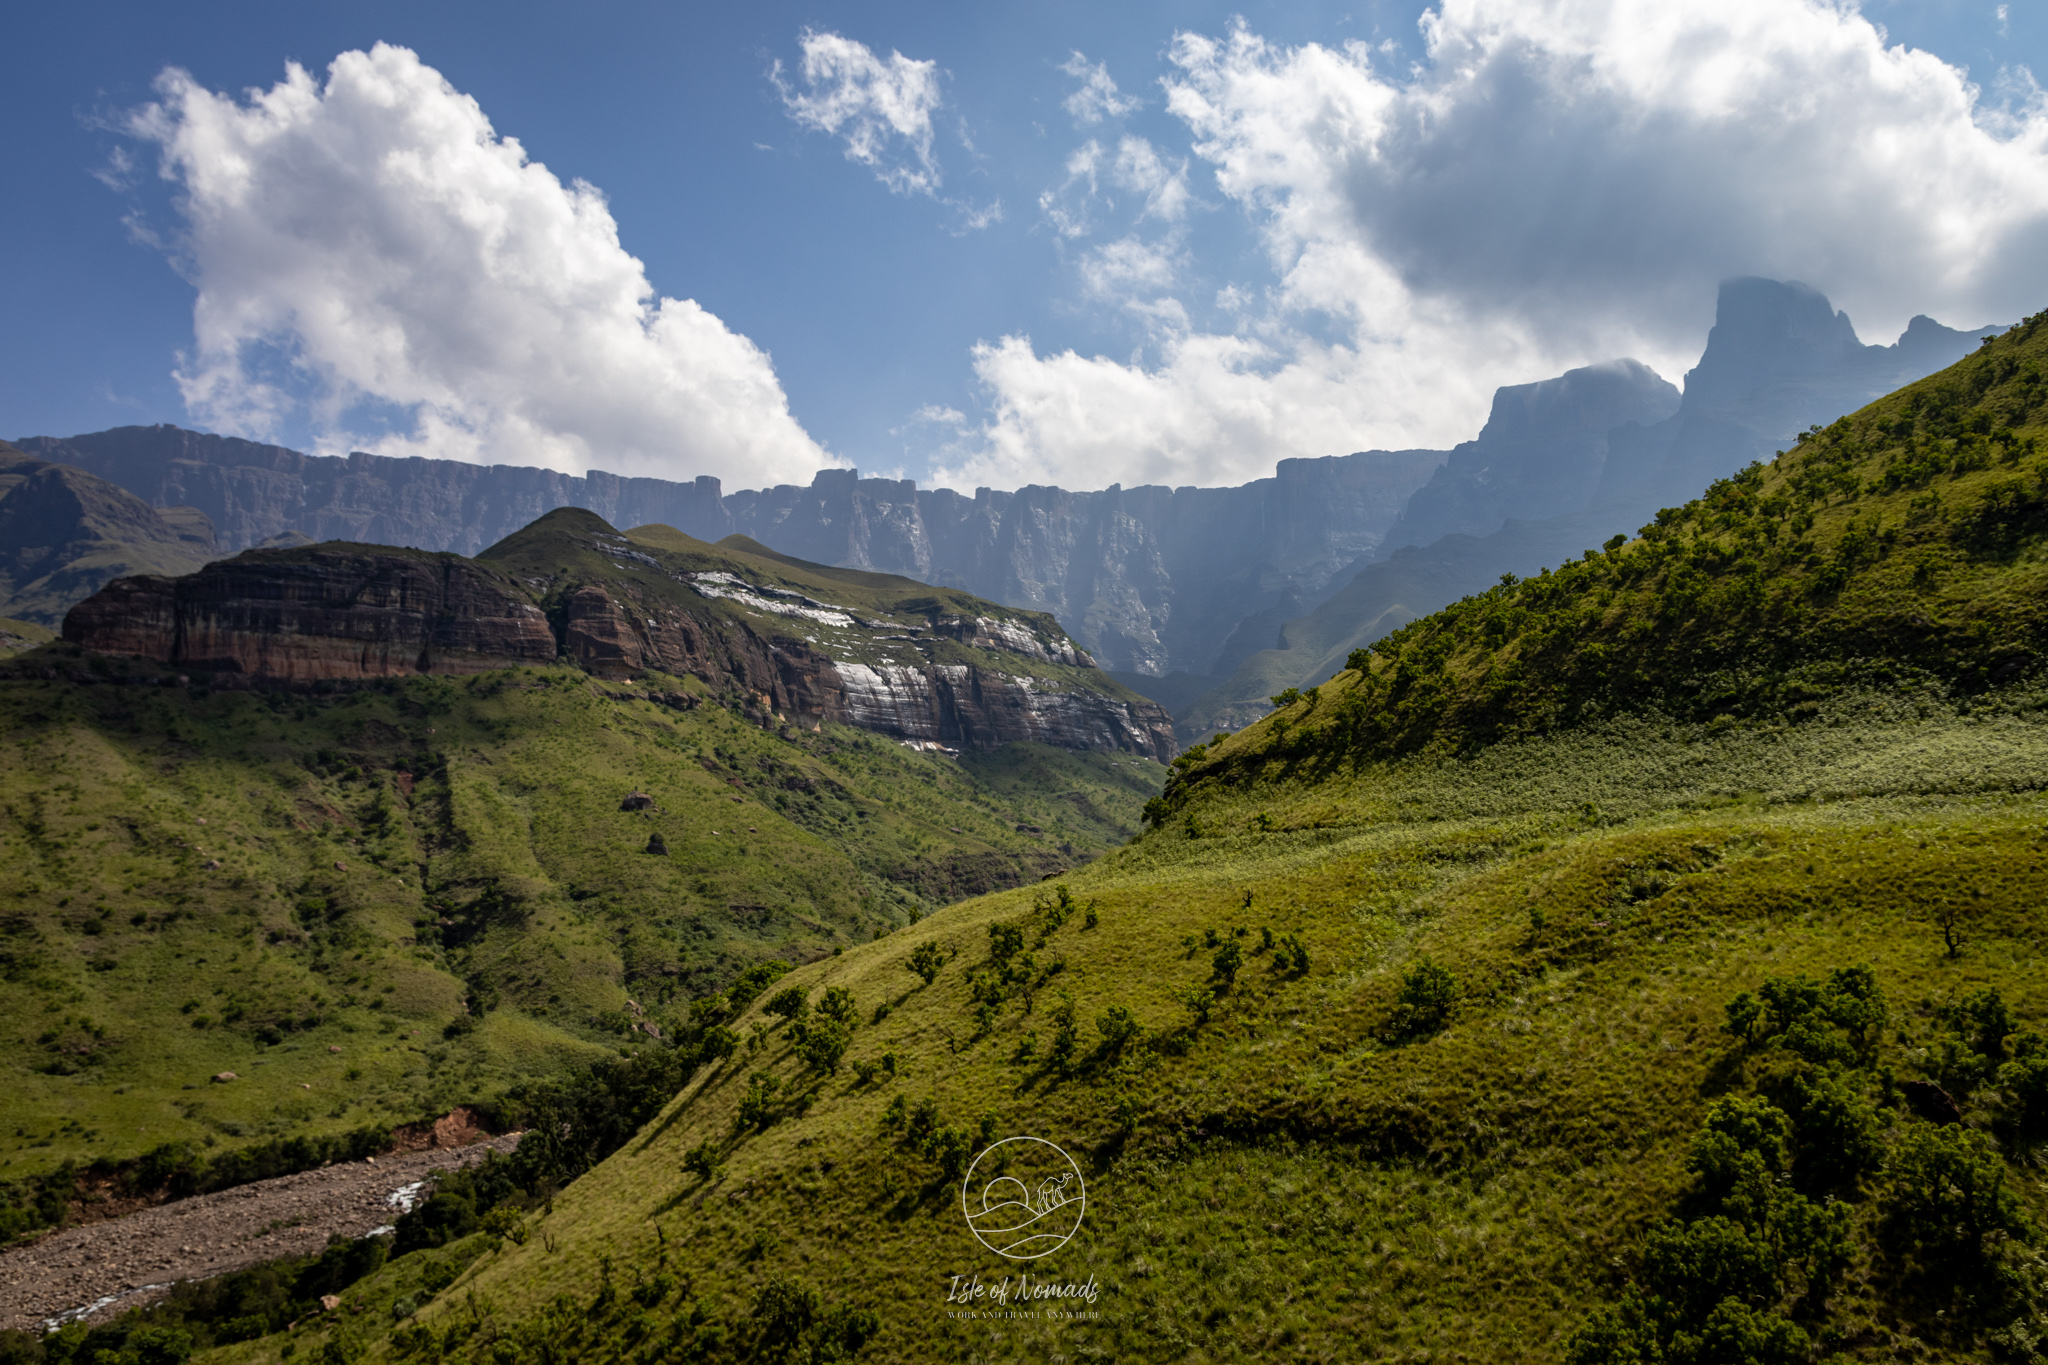 The majestic landscape of the Drakensberg mountains